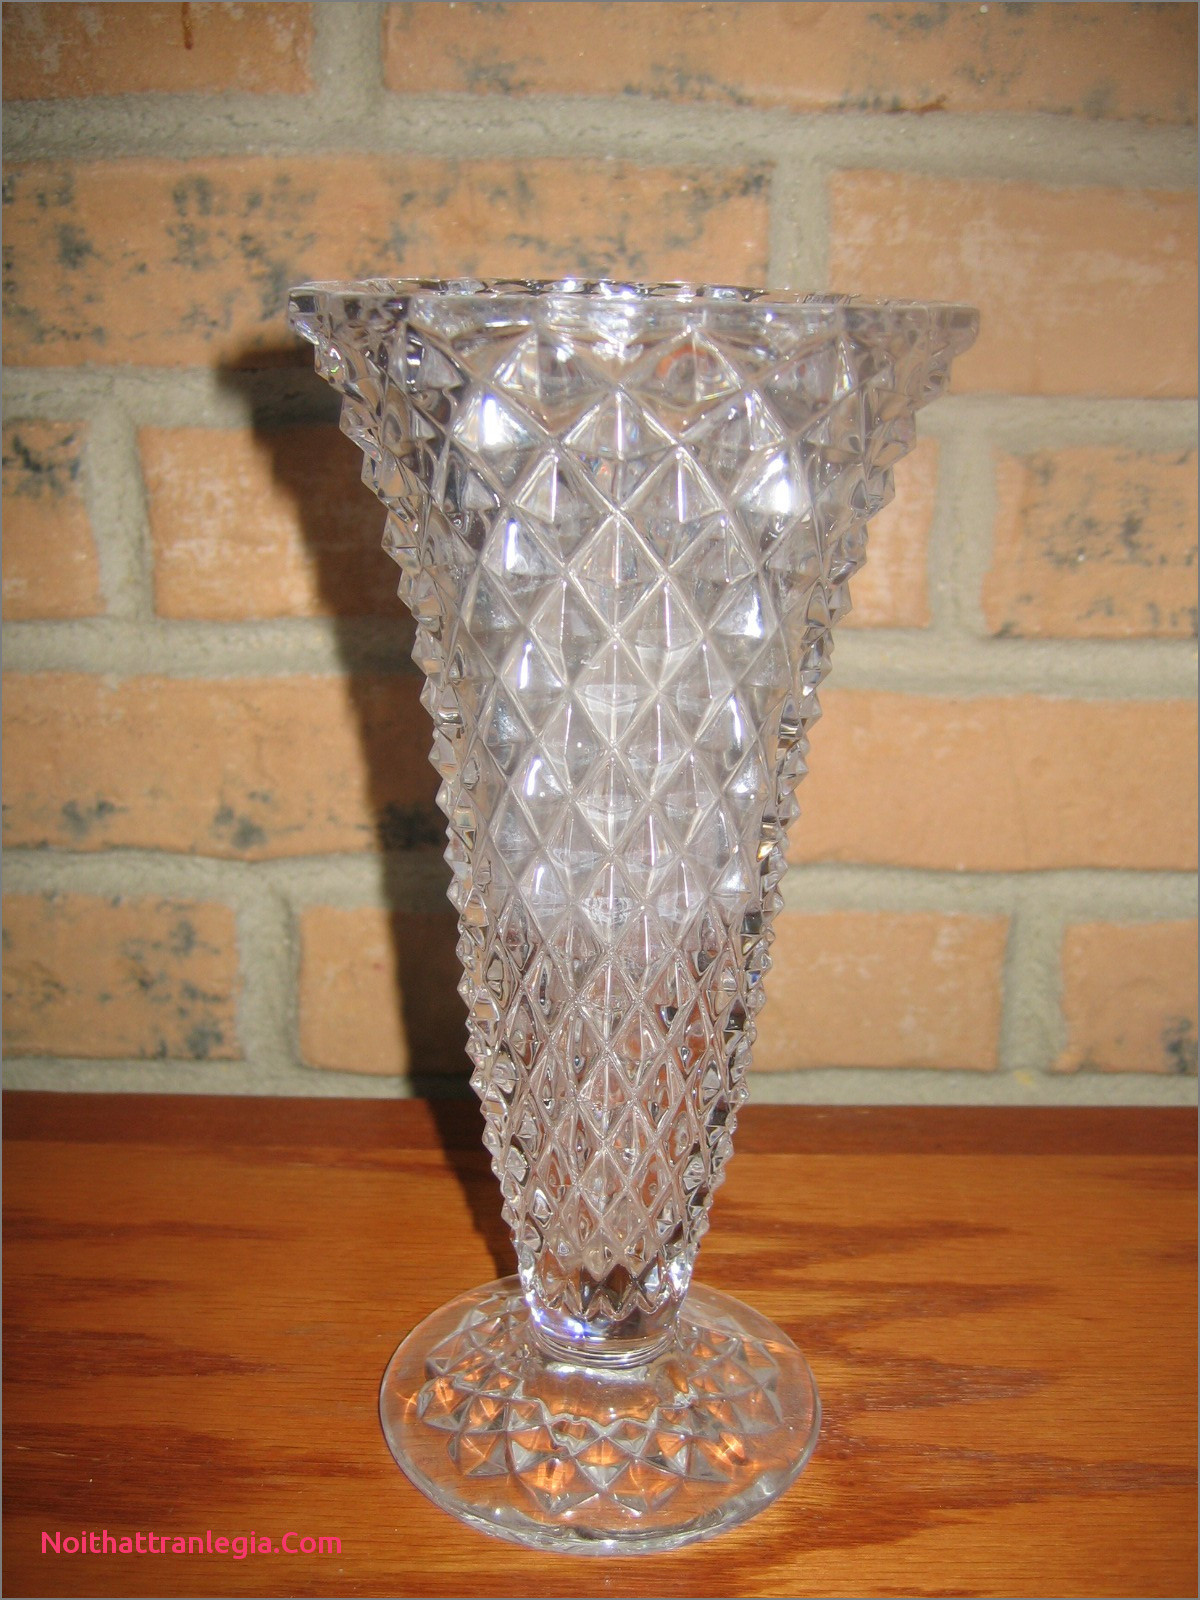 17 attractive Clear Glass Fish Vase 2024 free download clear glass fish vase of 20 cut glass antique vase noithattranlegia vases design with regard to glass vase decoration ideas vases antique crystal 2 gorgeous edwardian cut lead glass